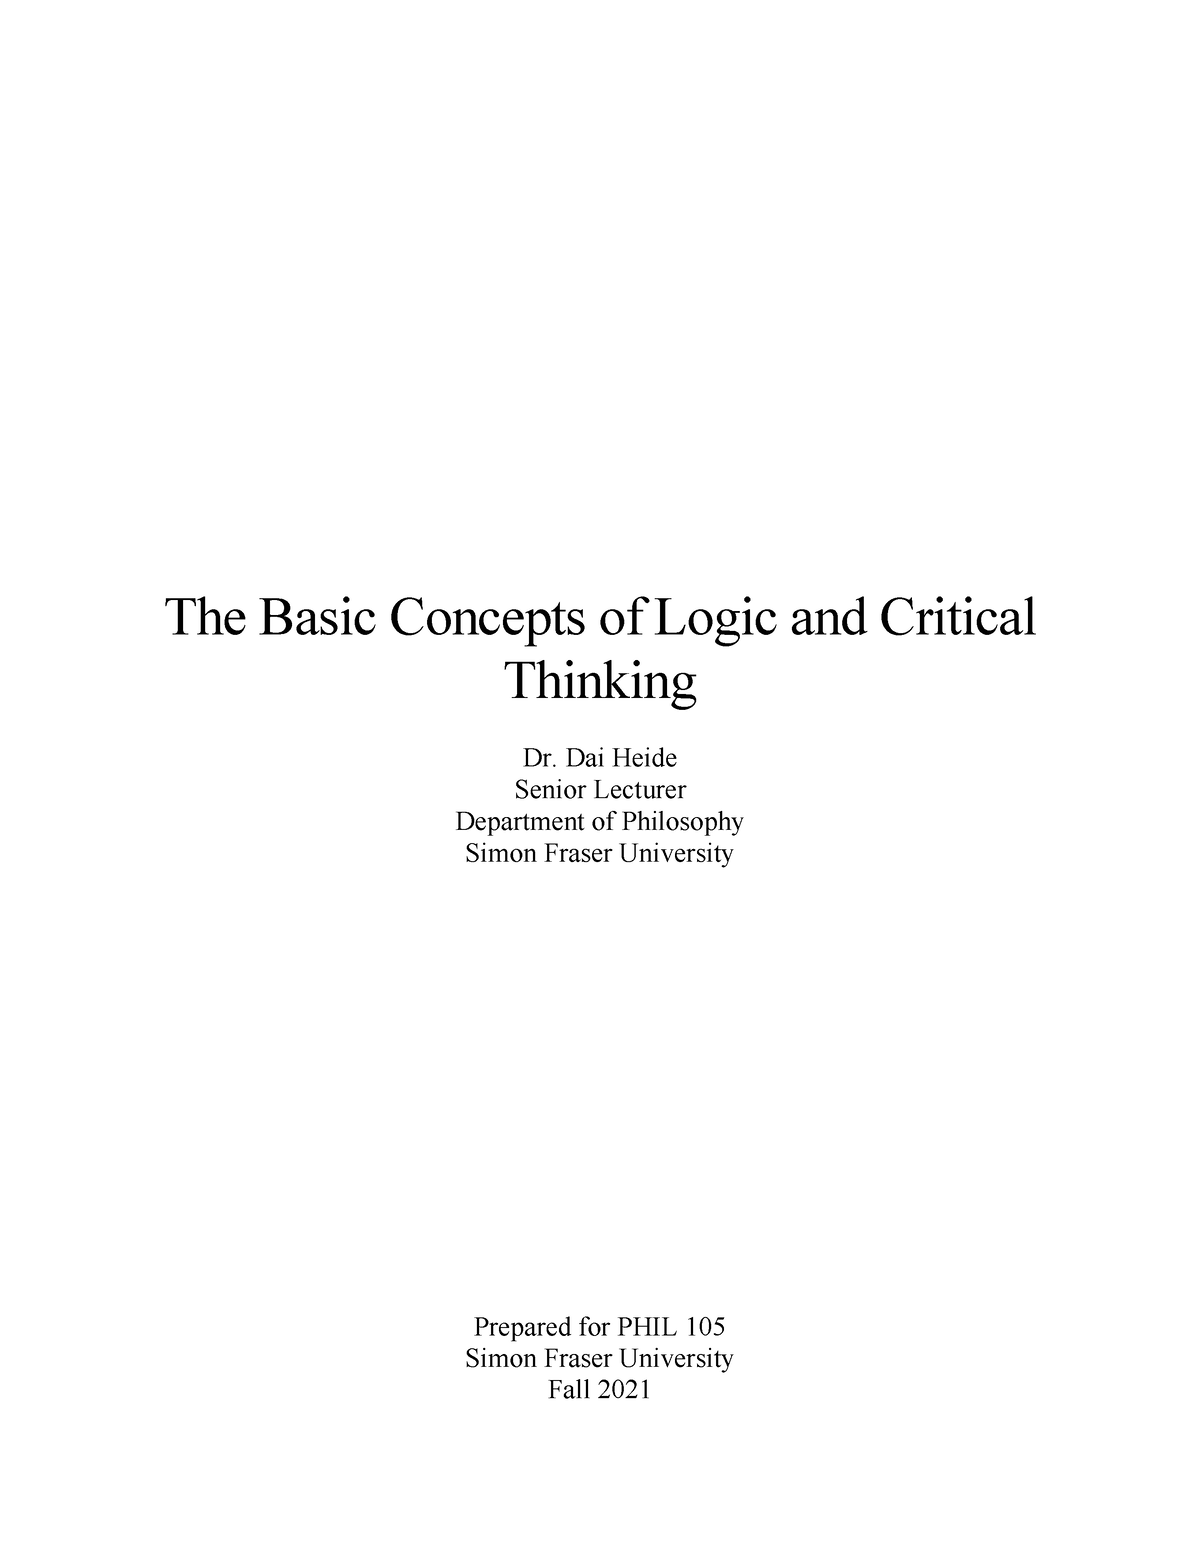 logic and critical thinking course code phil 1011 pdf